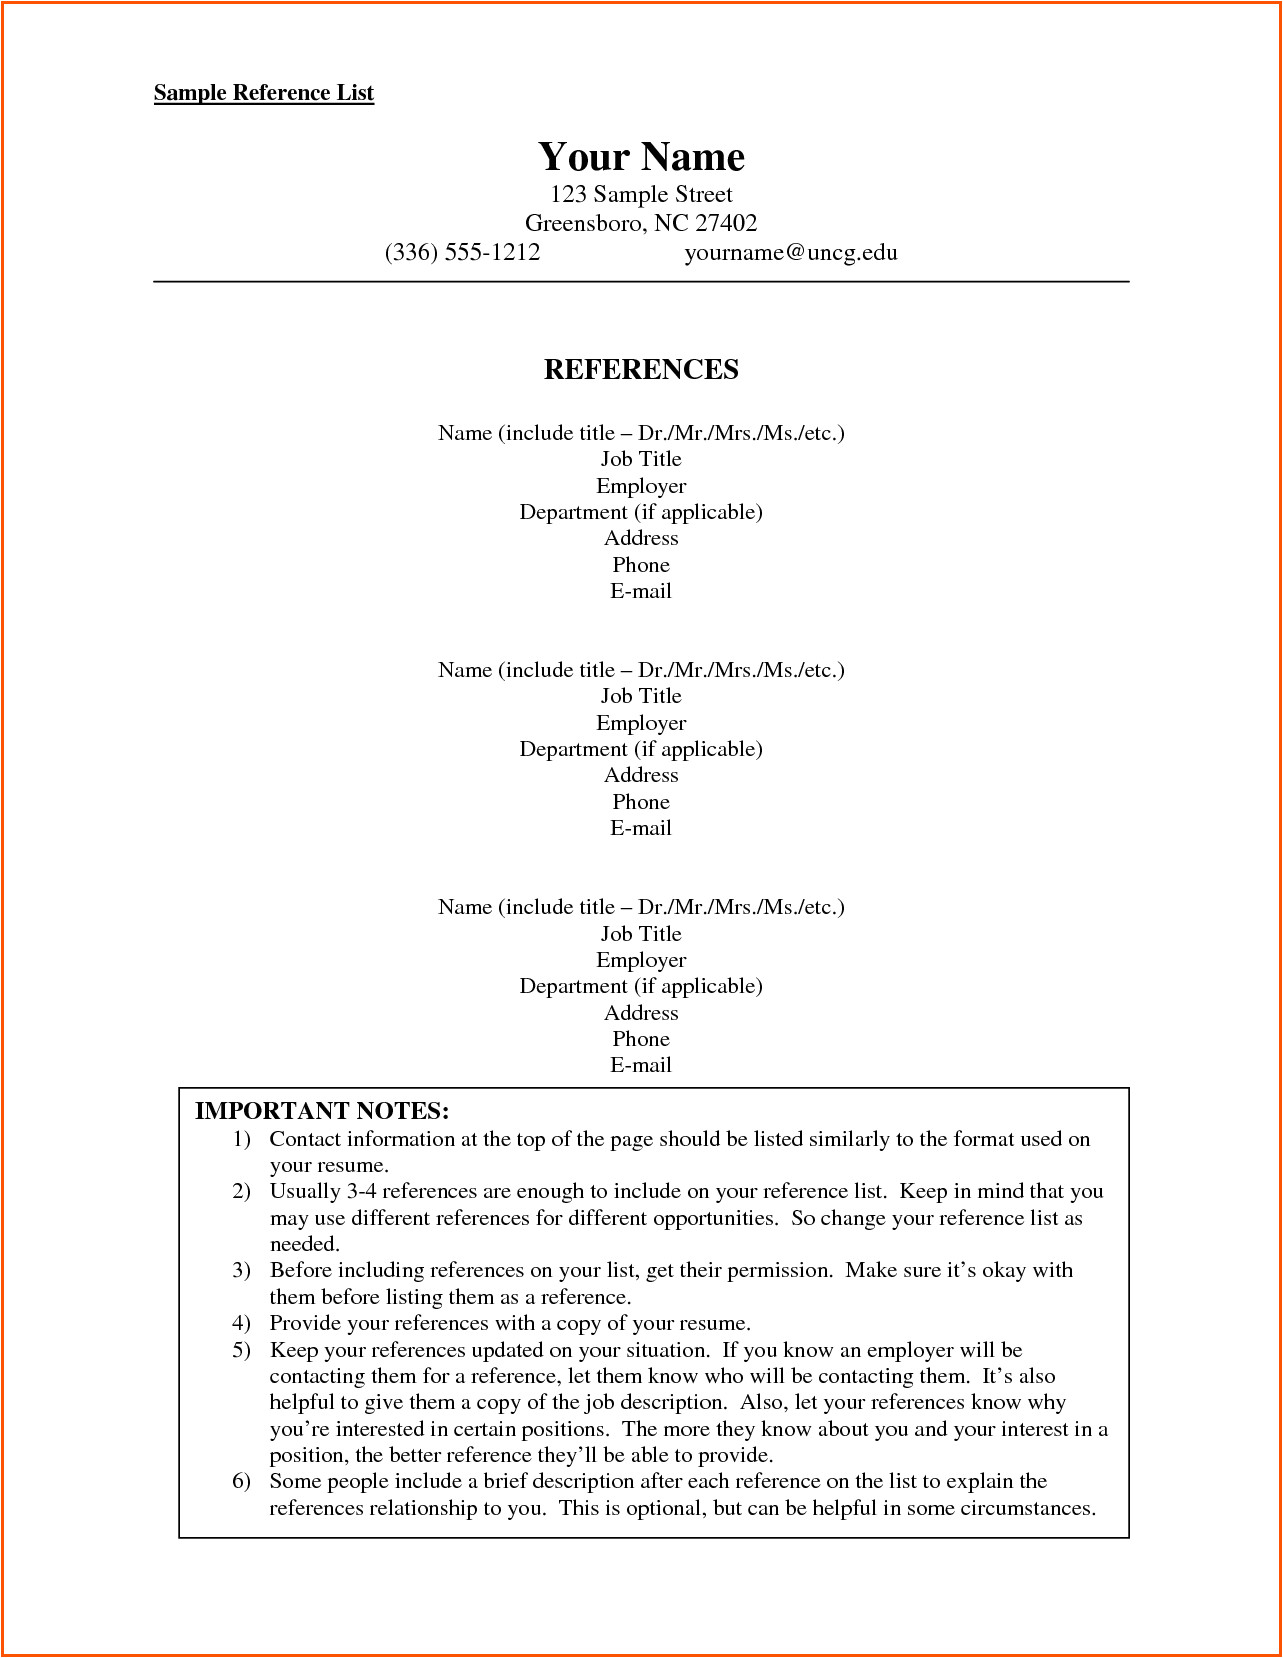 resume reference list format